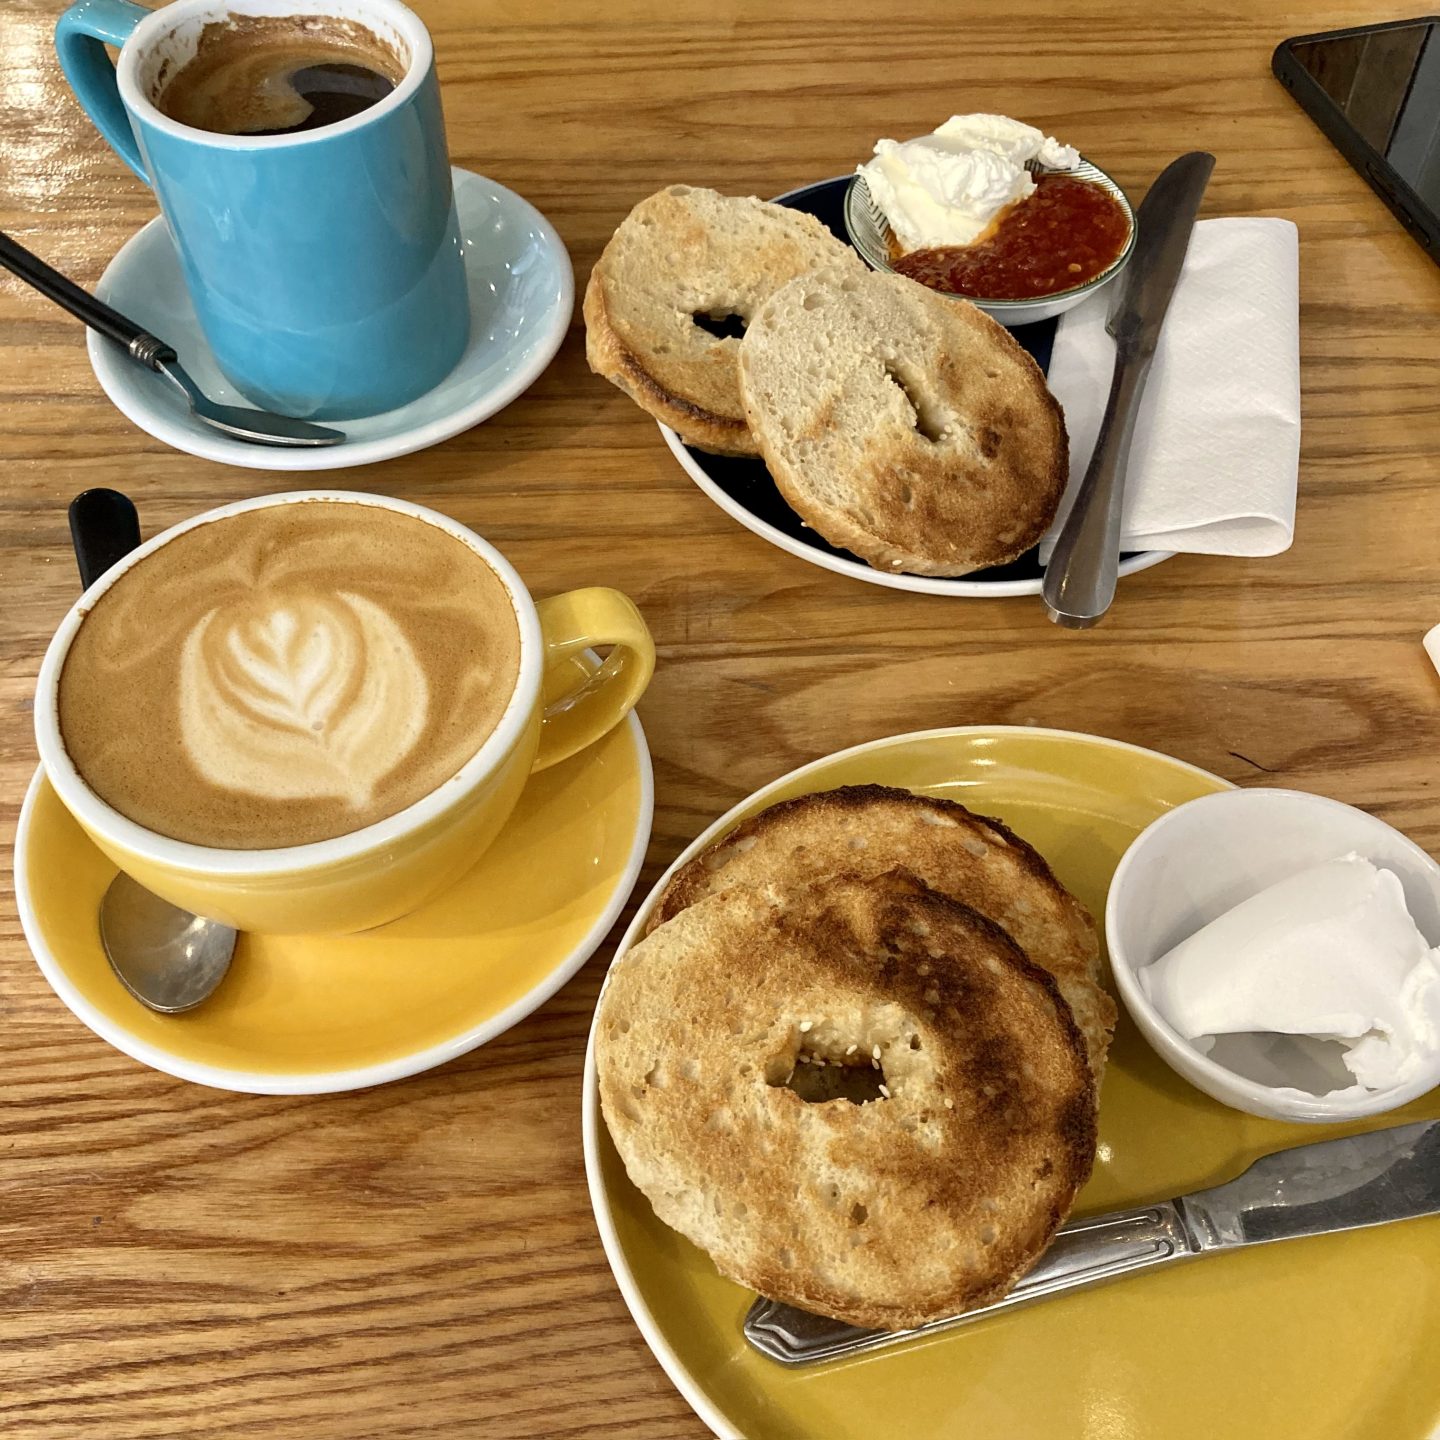 Two freshly baked bagels accompanied by vegan cream cheese and jam, alongside a latte and a cappuccino in colourful mugs